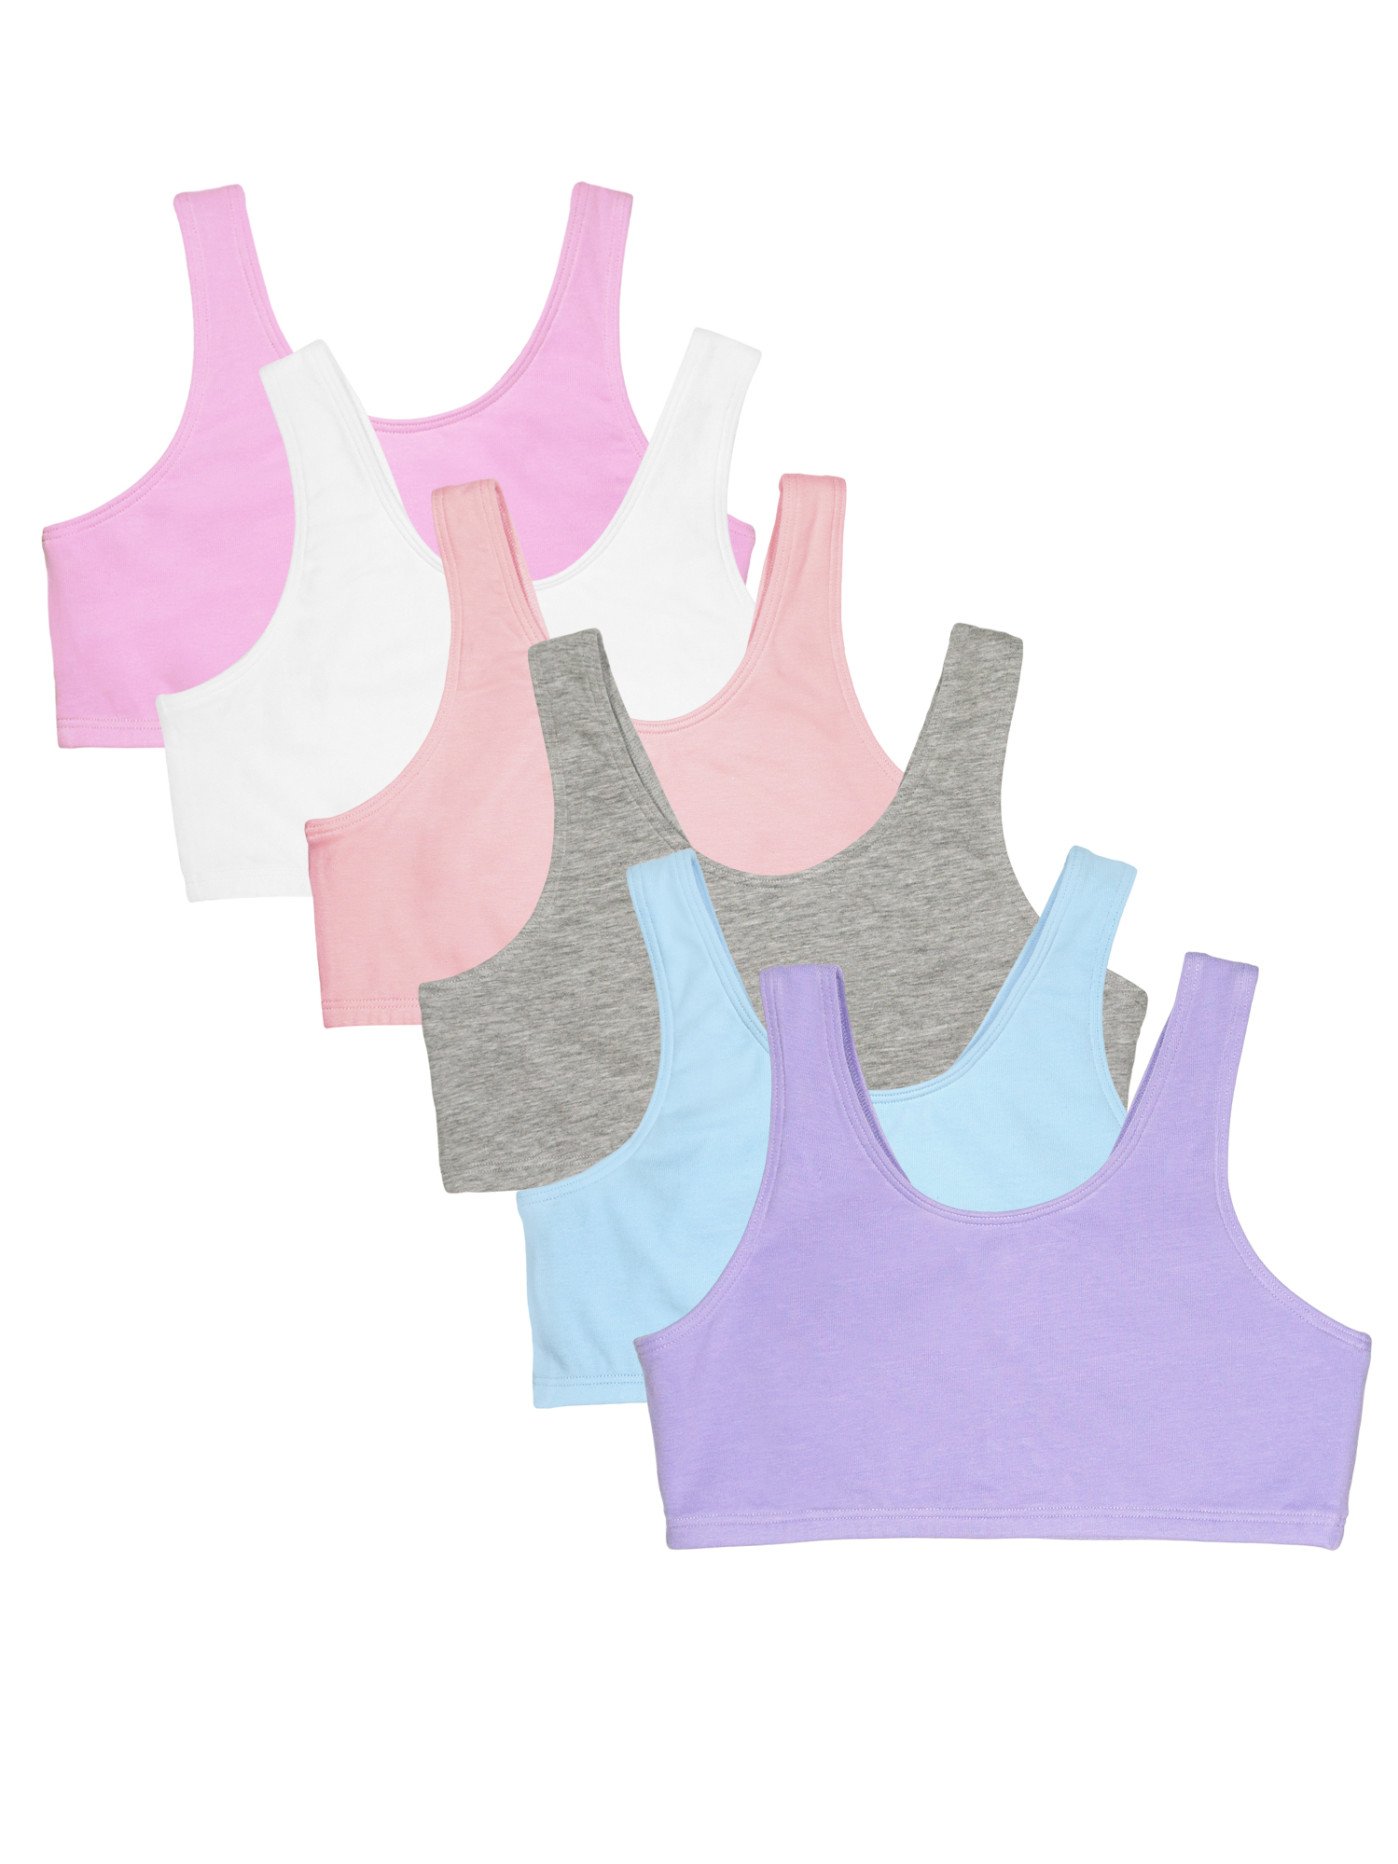 Big Extra 25% Off for Members: 100s of Styles Added Sports Bras